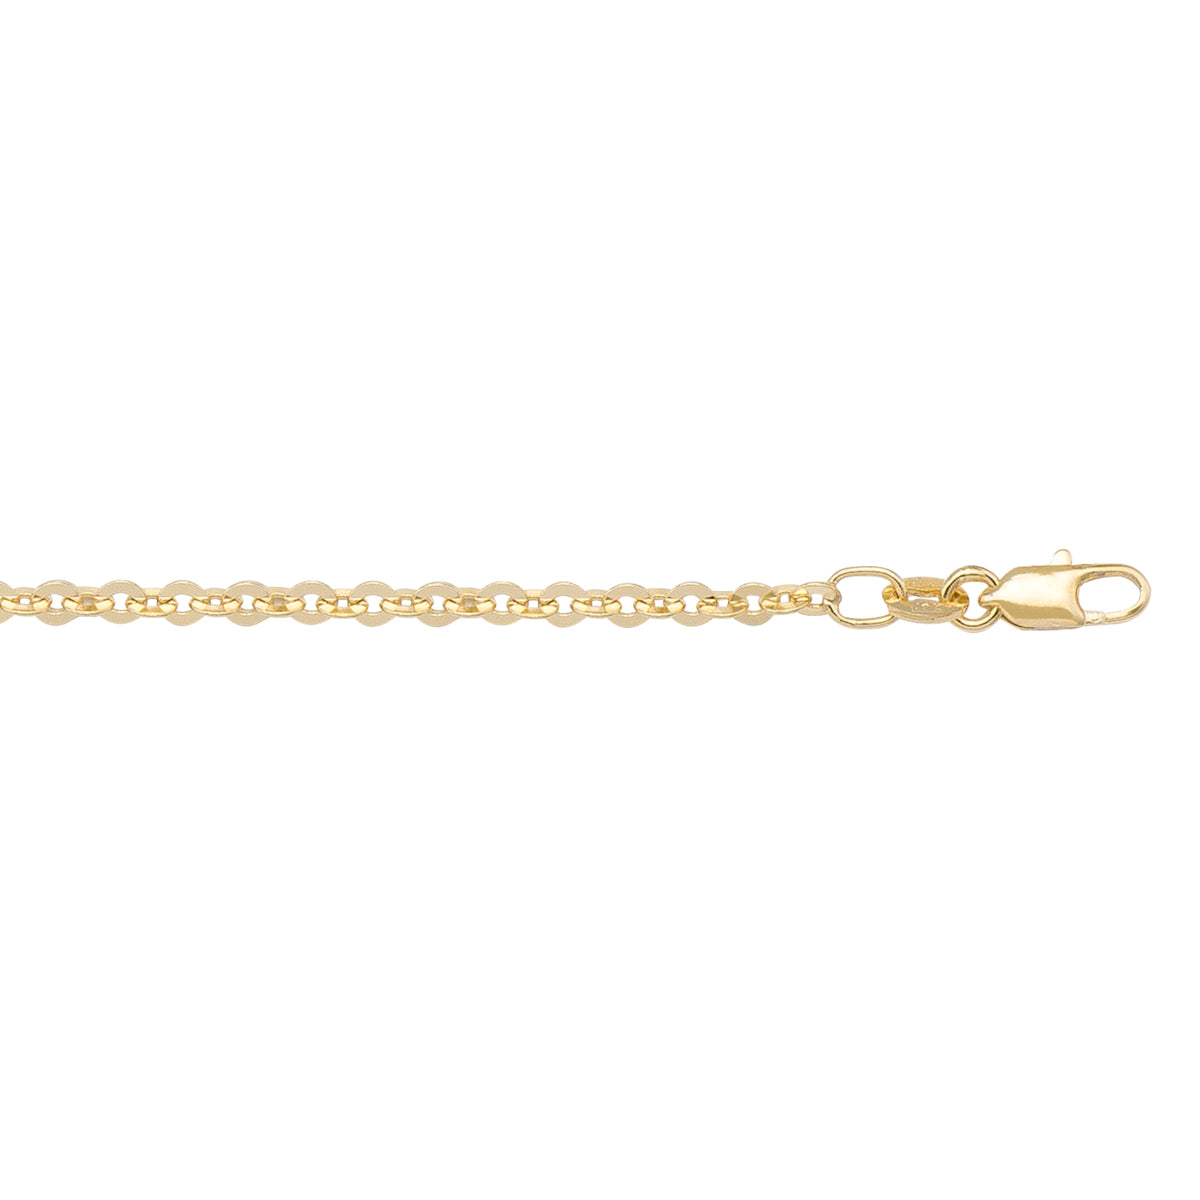 CHAINS YELLOW GOLD SOLID CABLE LINK 